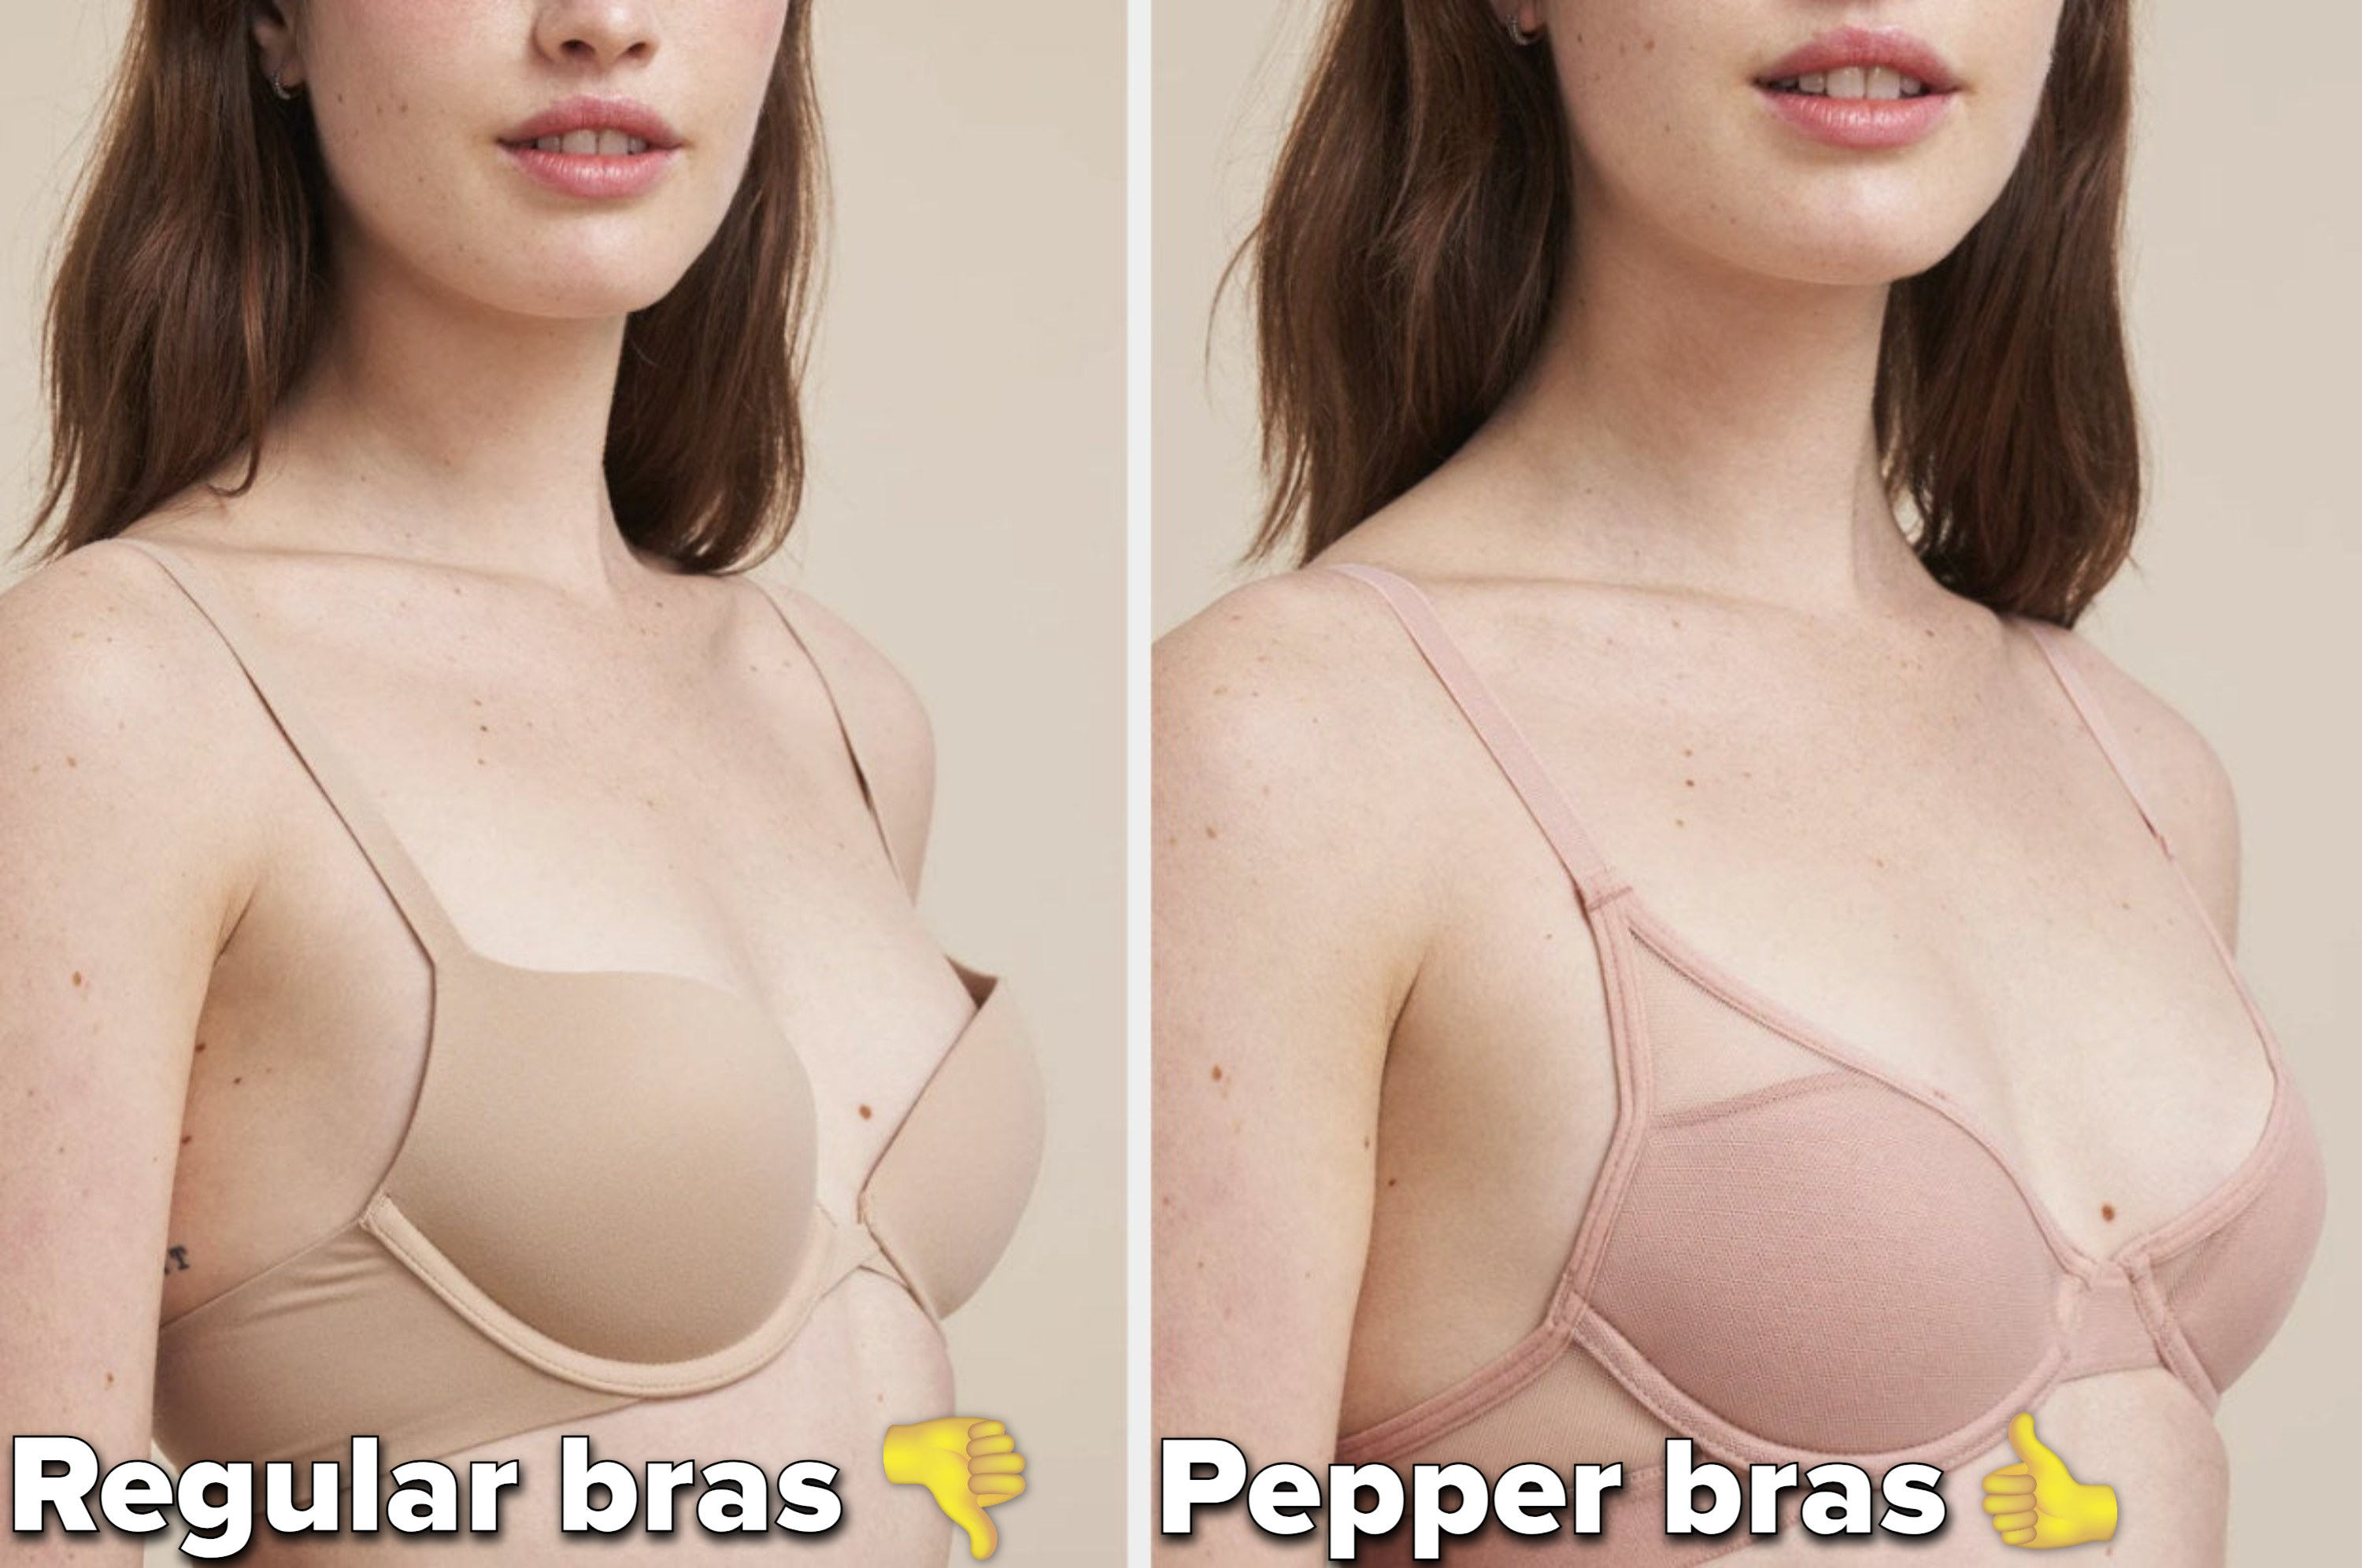 model side-by-side wearing a normal bra with gapping, and a pink pepper bra that fits well